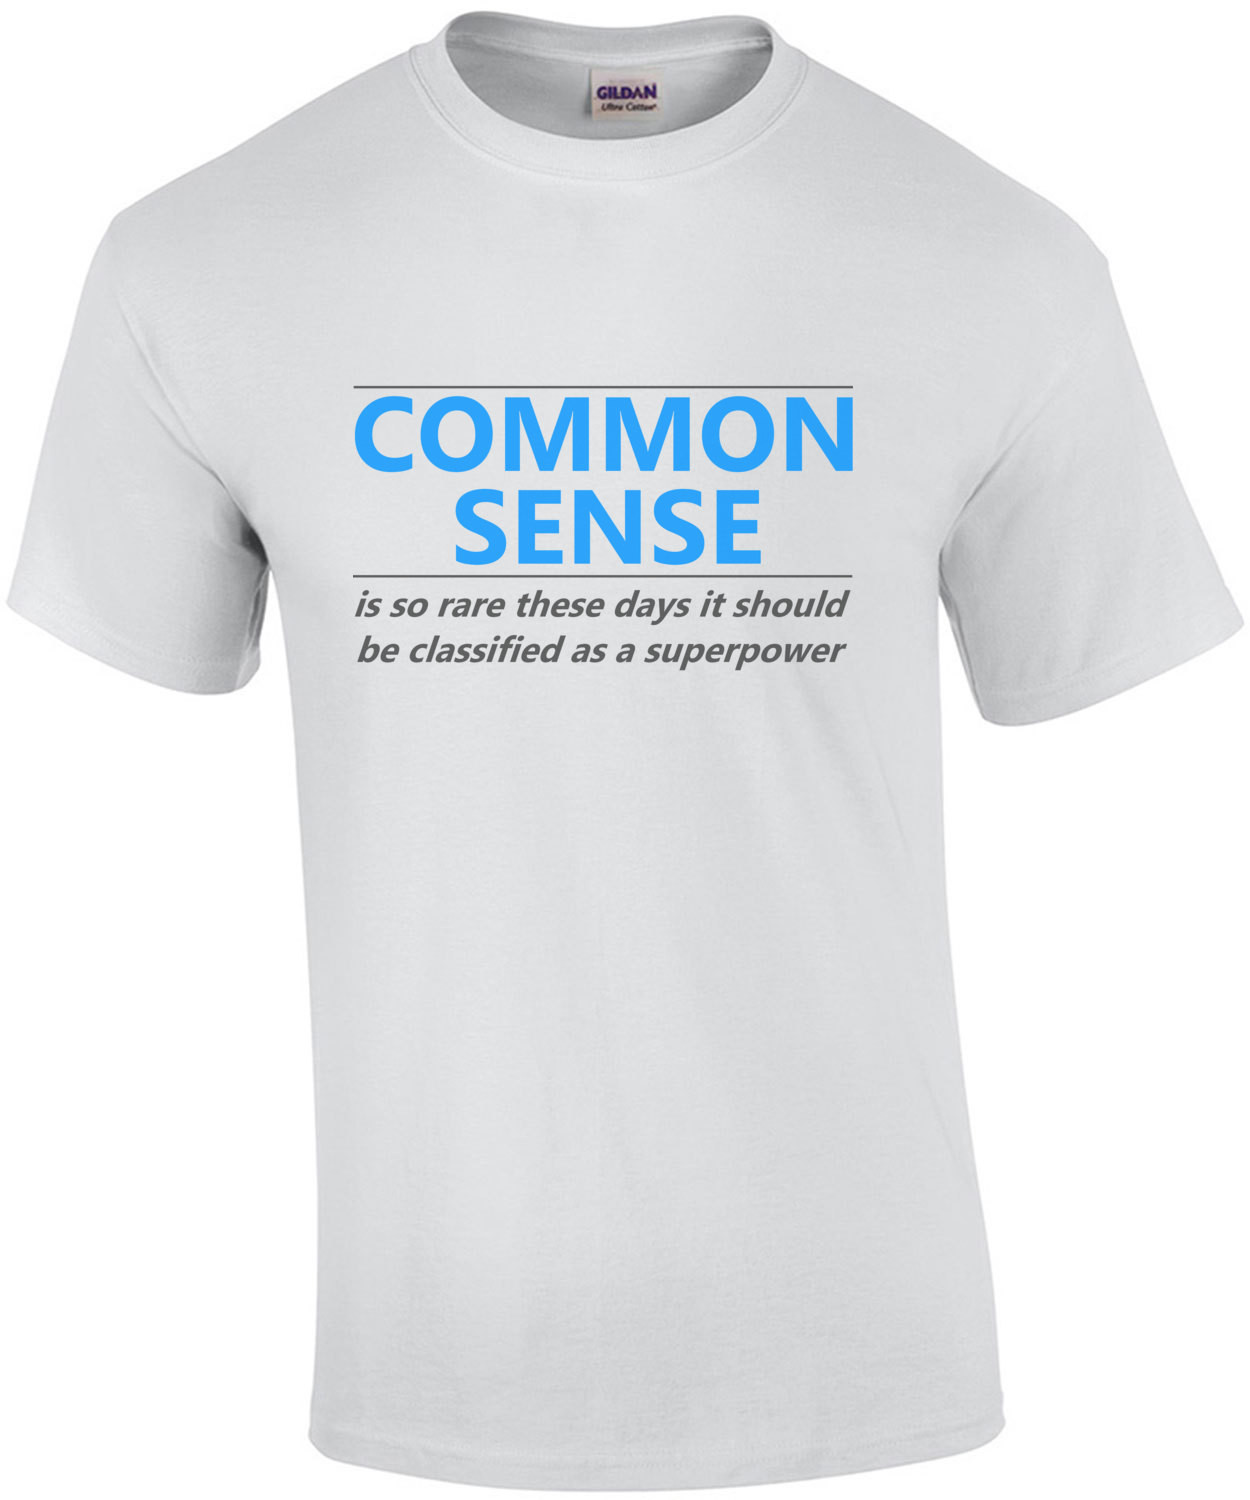 COMMON SENSE IS SO RARE THESE DAYS, IT SHOULD BE CLASSIFIED AS A SUPER POWER Shirt